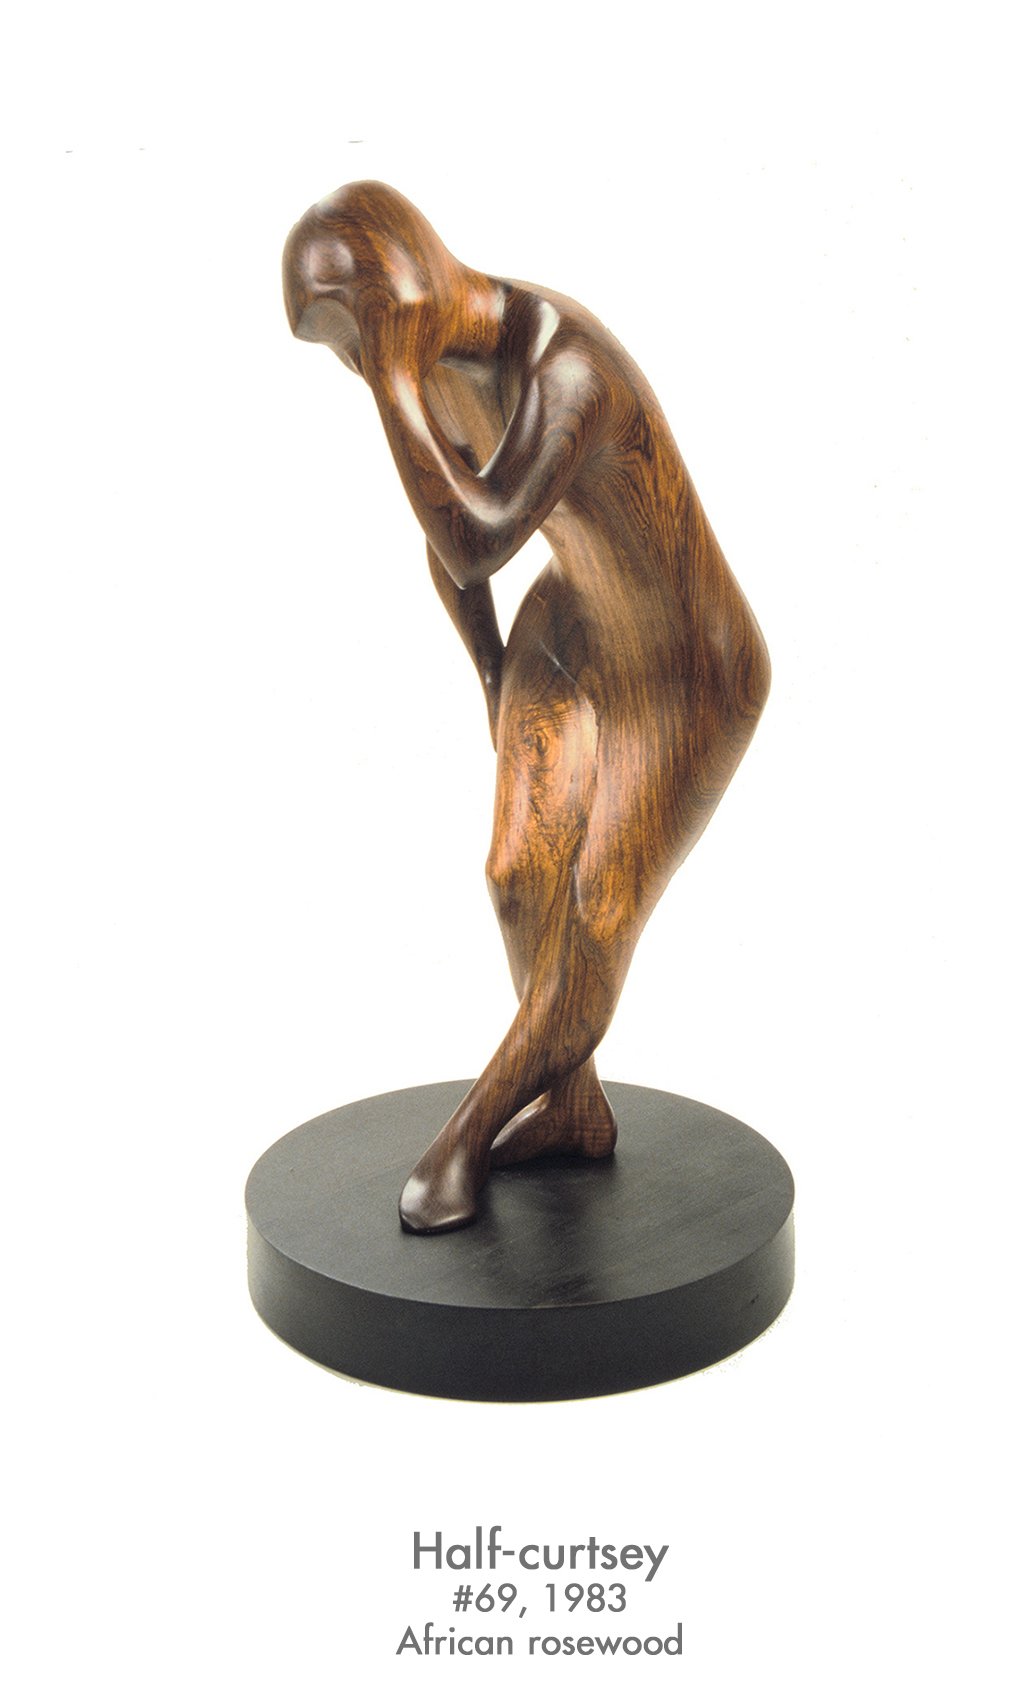 Half-curtsey, 1983, African rosewood, #63